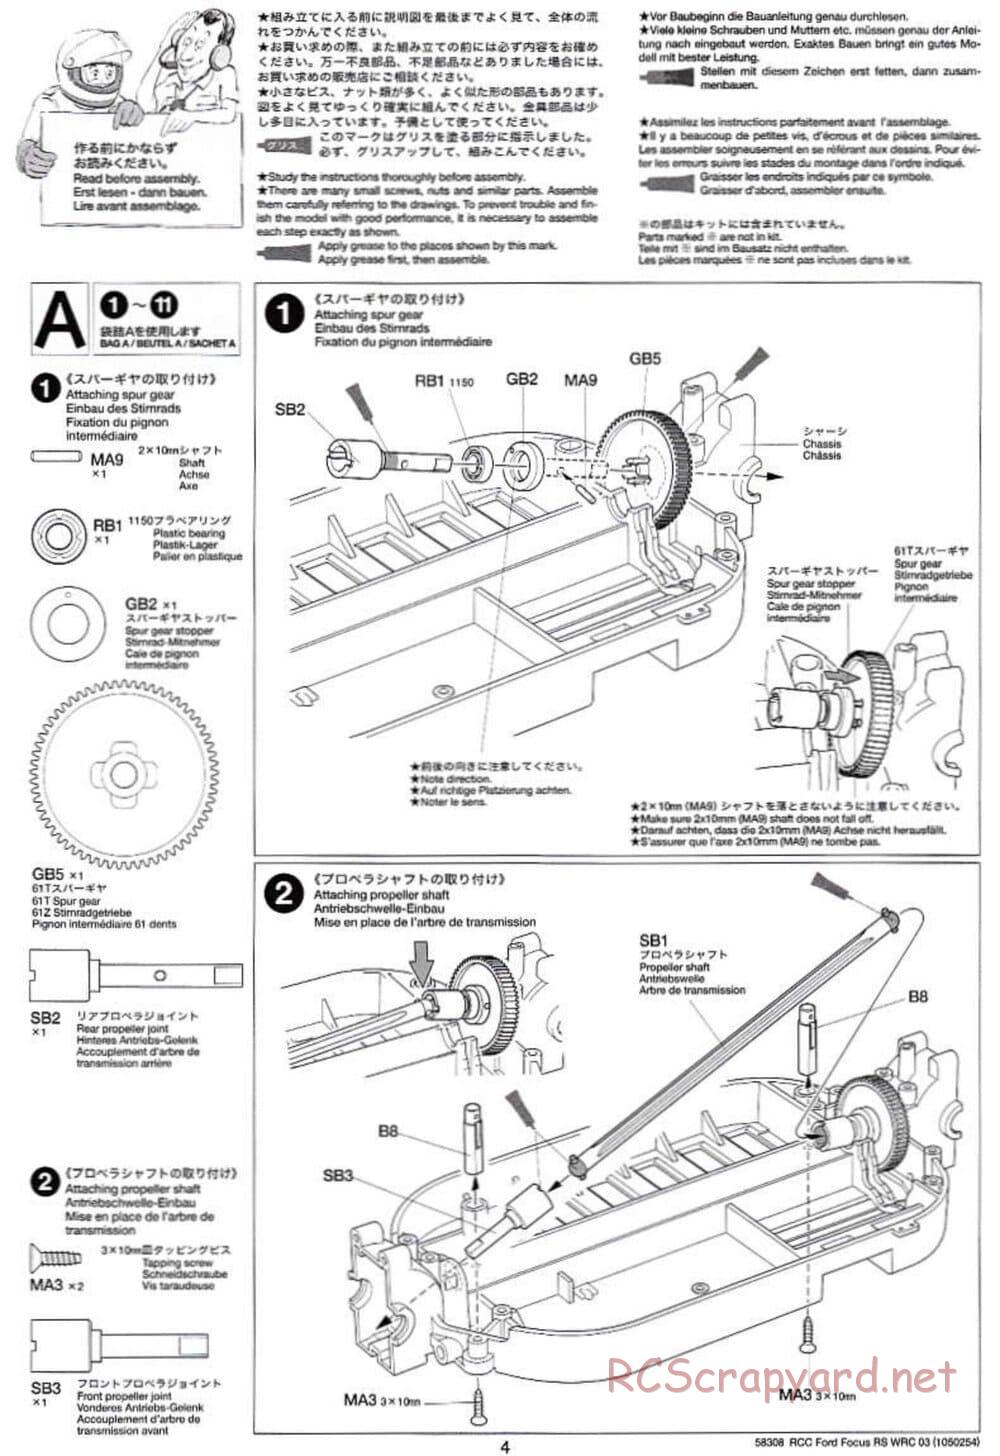 Tamiya - Ford Focus RS WRC 03 - TT-01 Chassis - Manual - Page 4